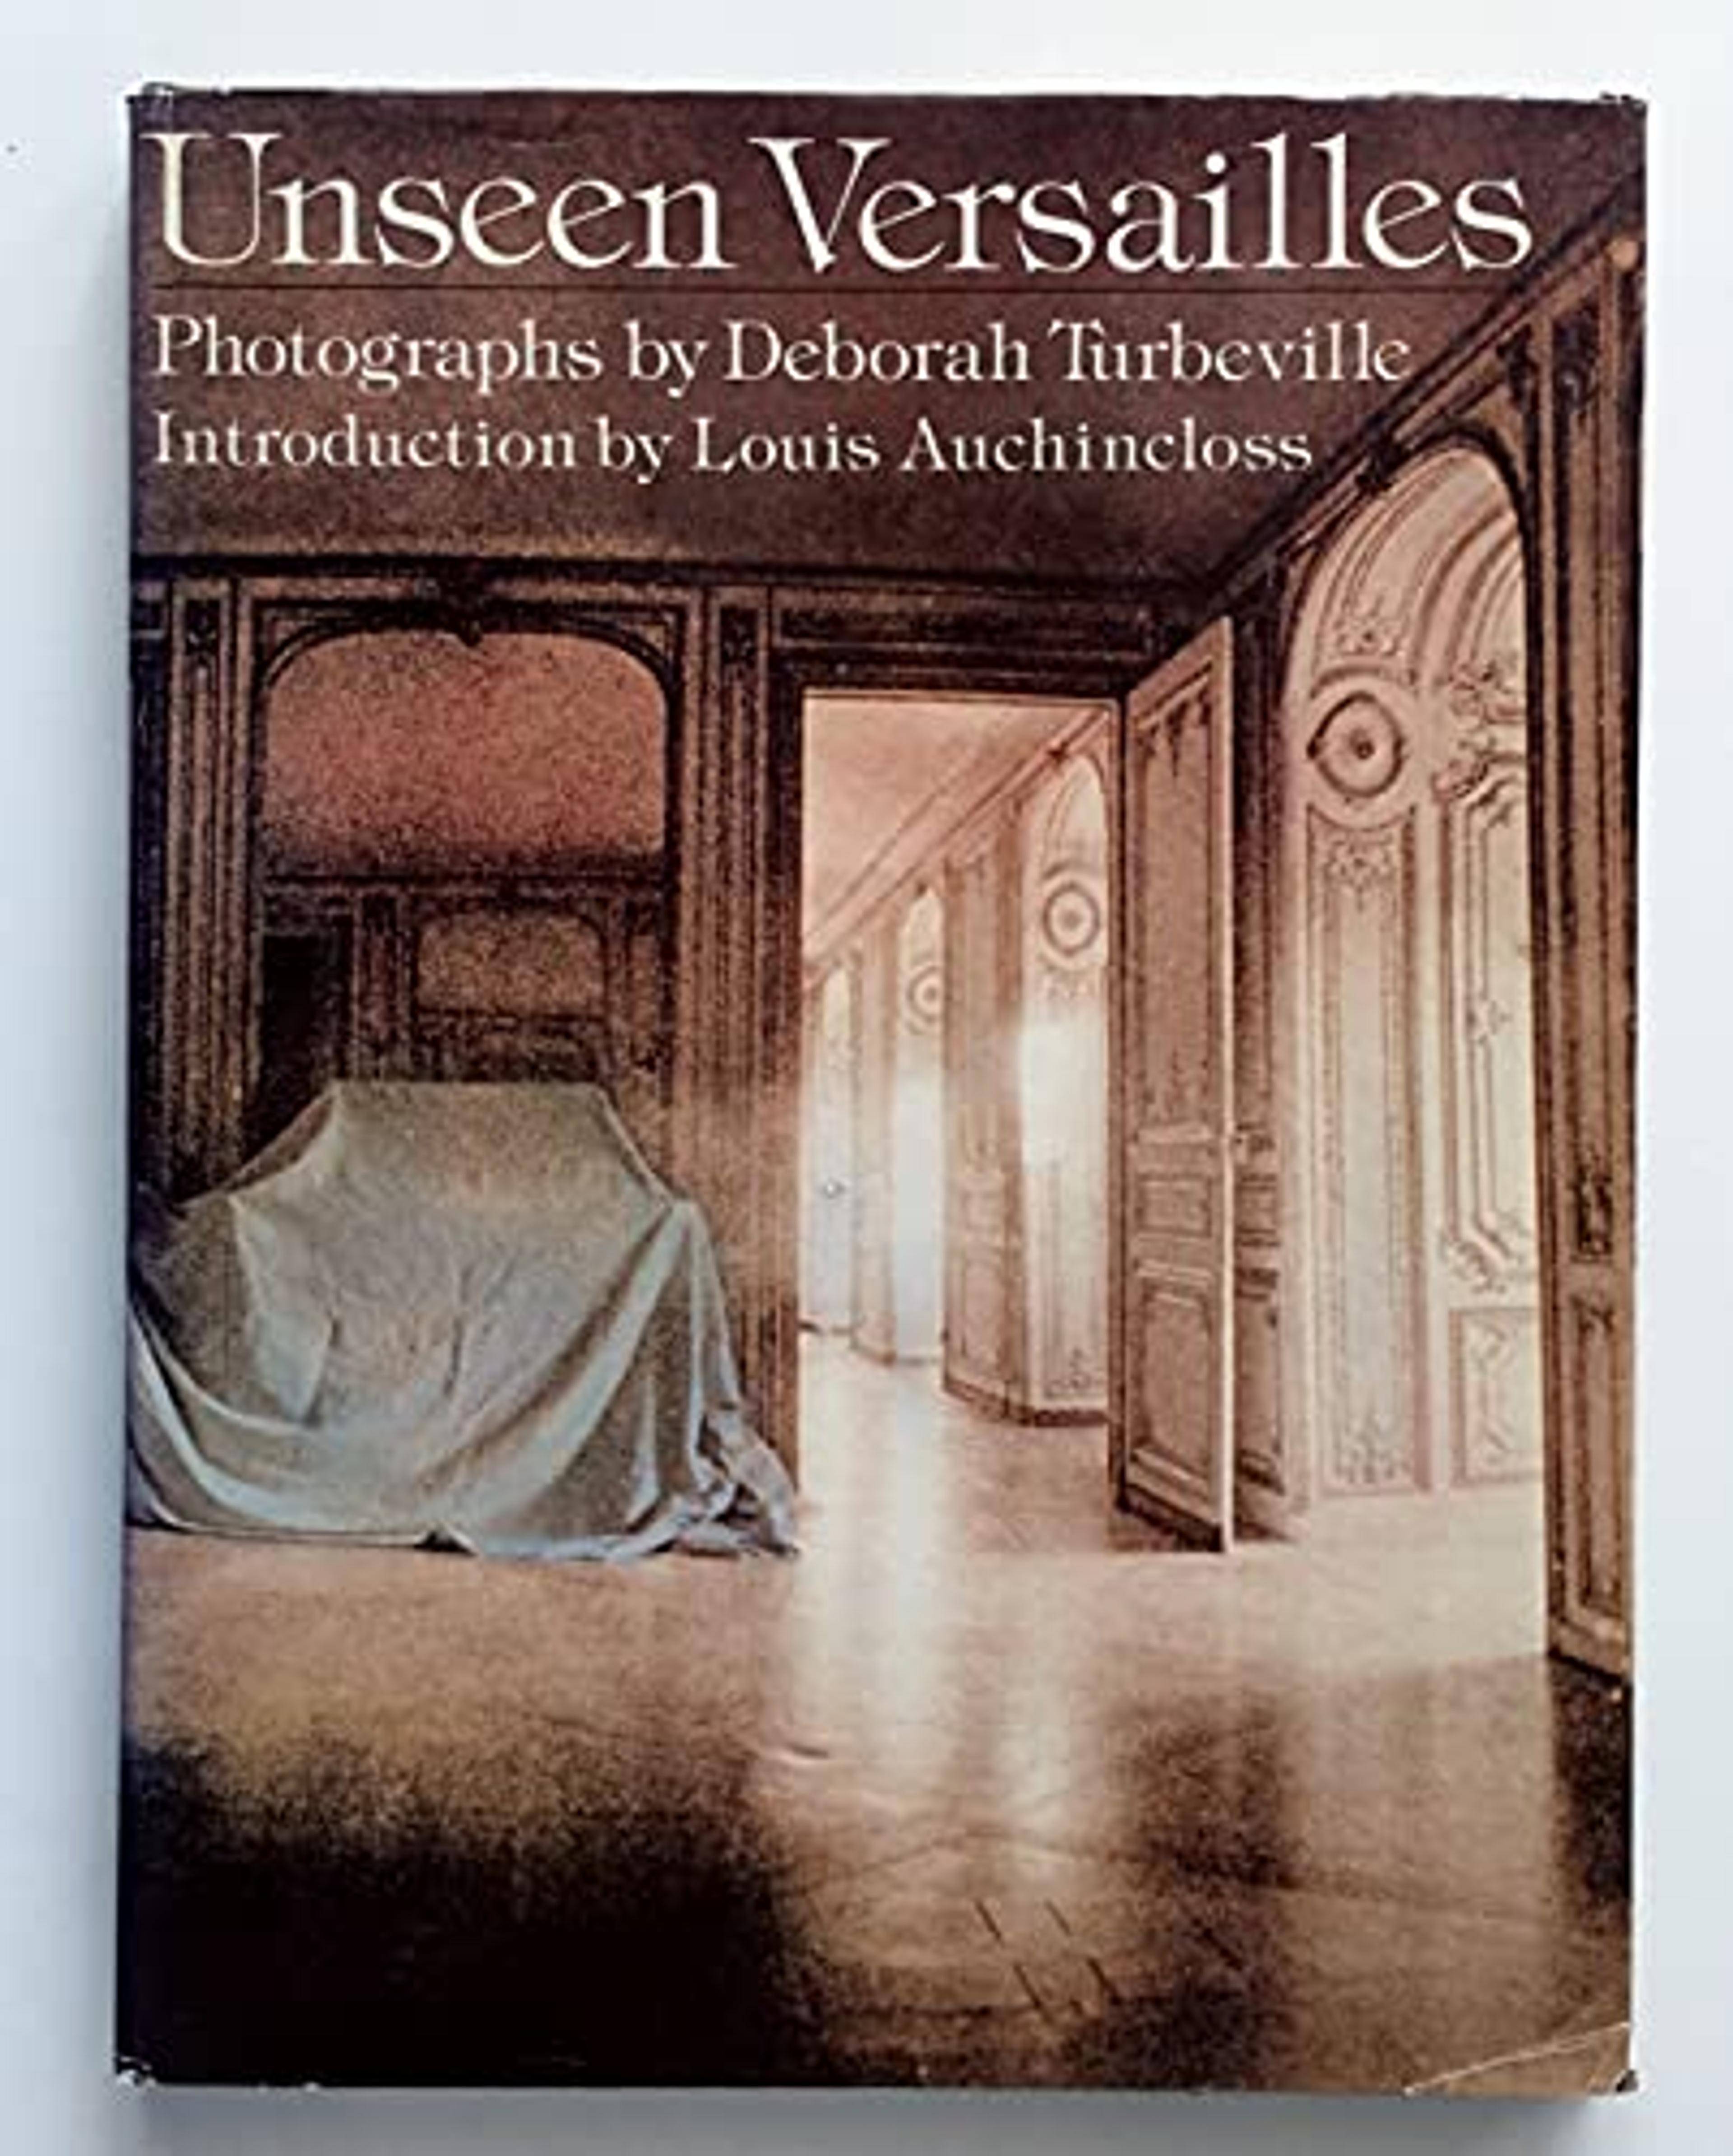 Unseen Versailles by Turbeville, Deborah and Auchincloss, Louis: (1981) First Edition. | Winged Monkey Books